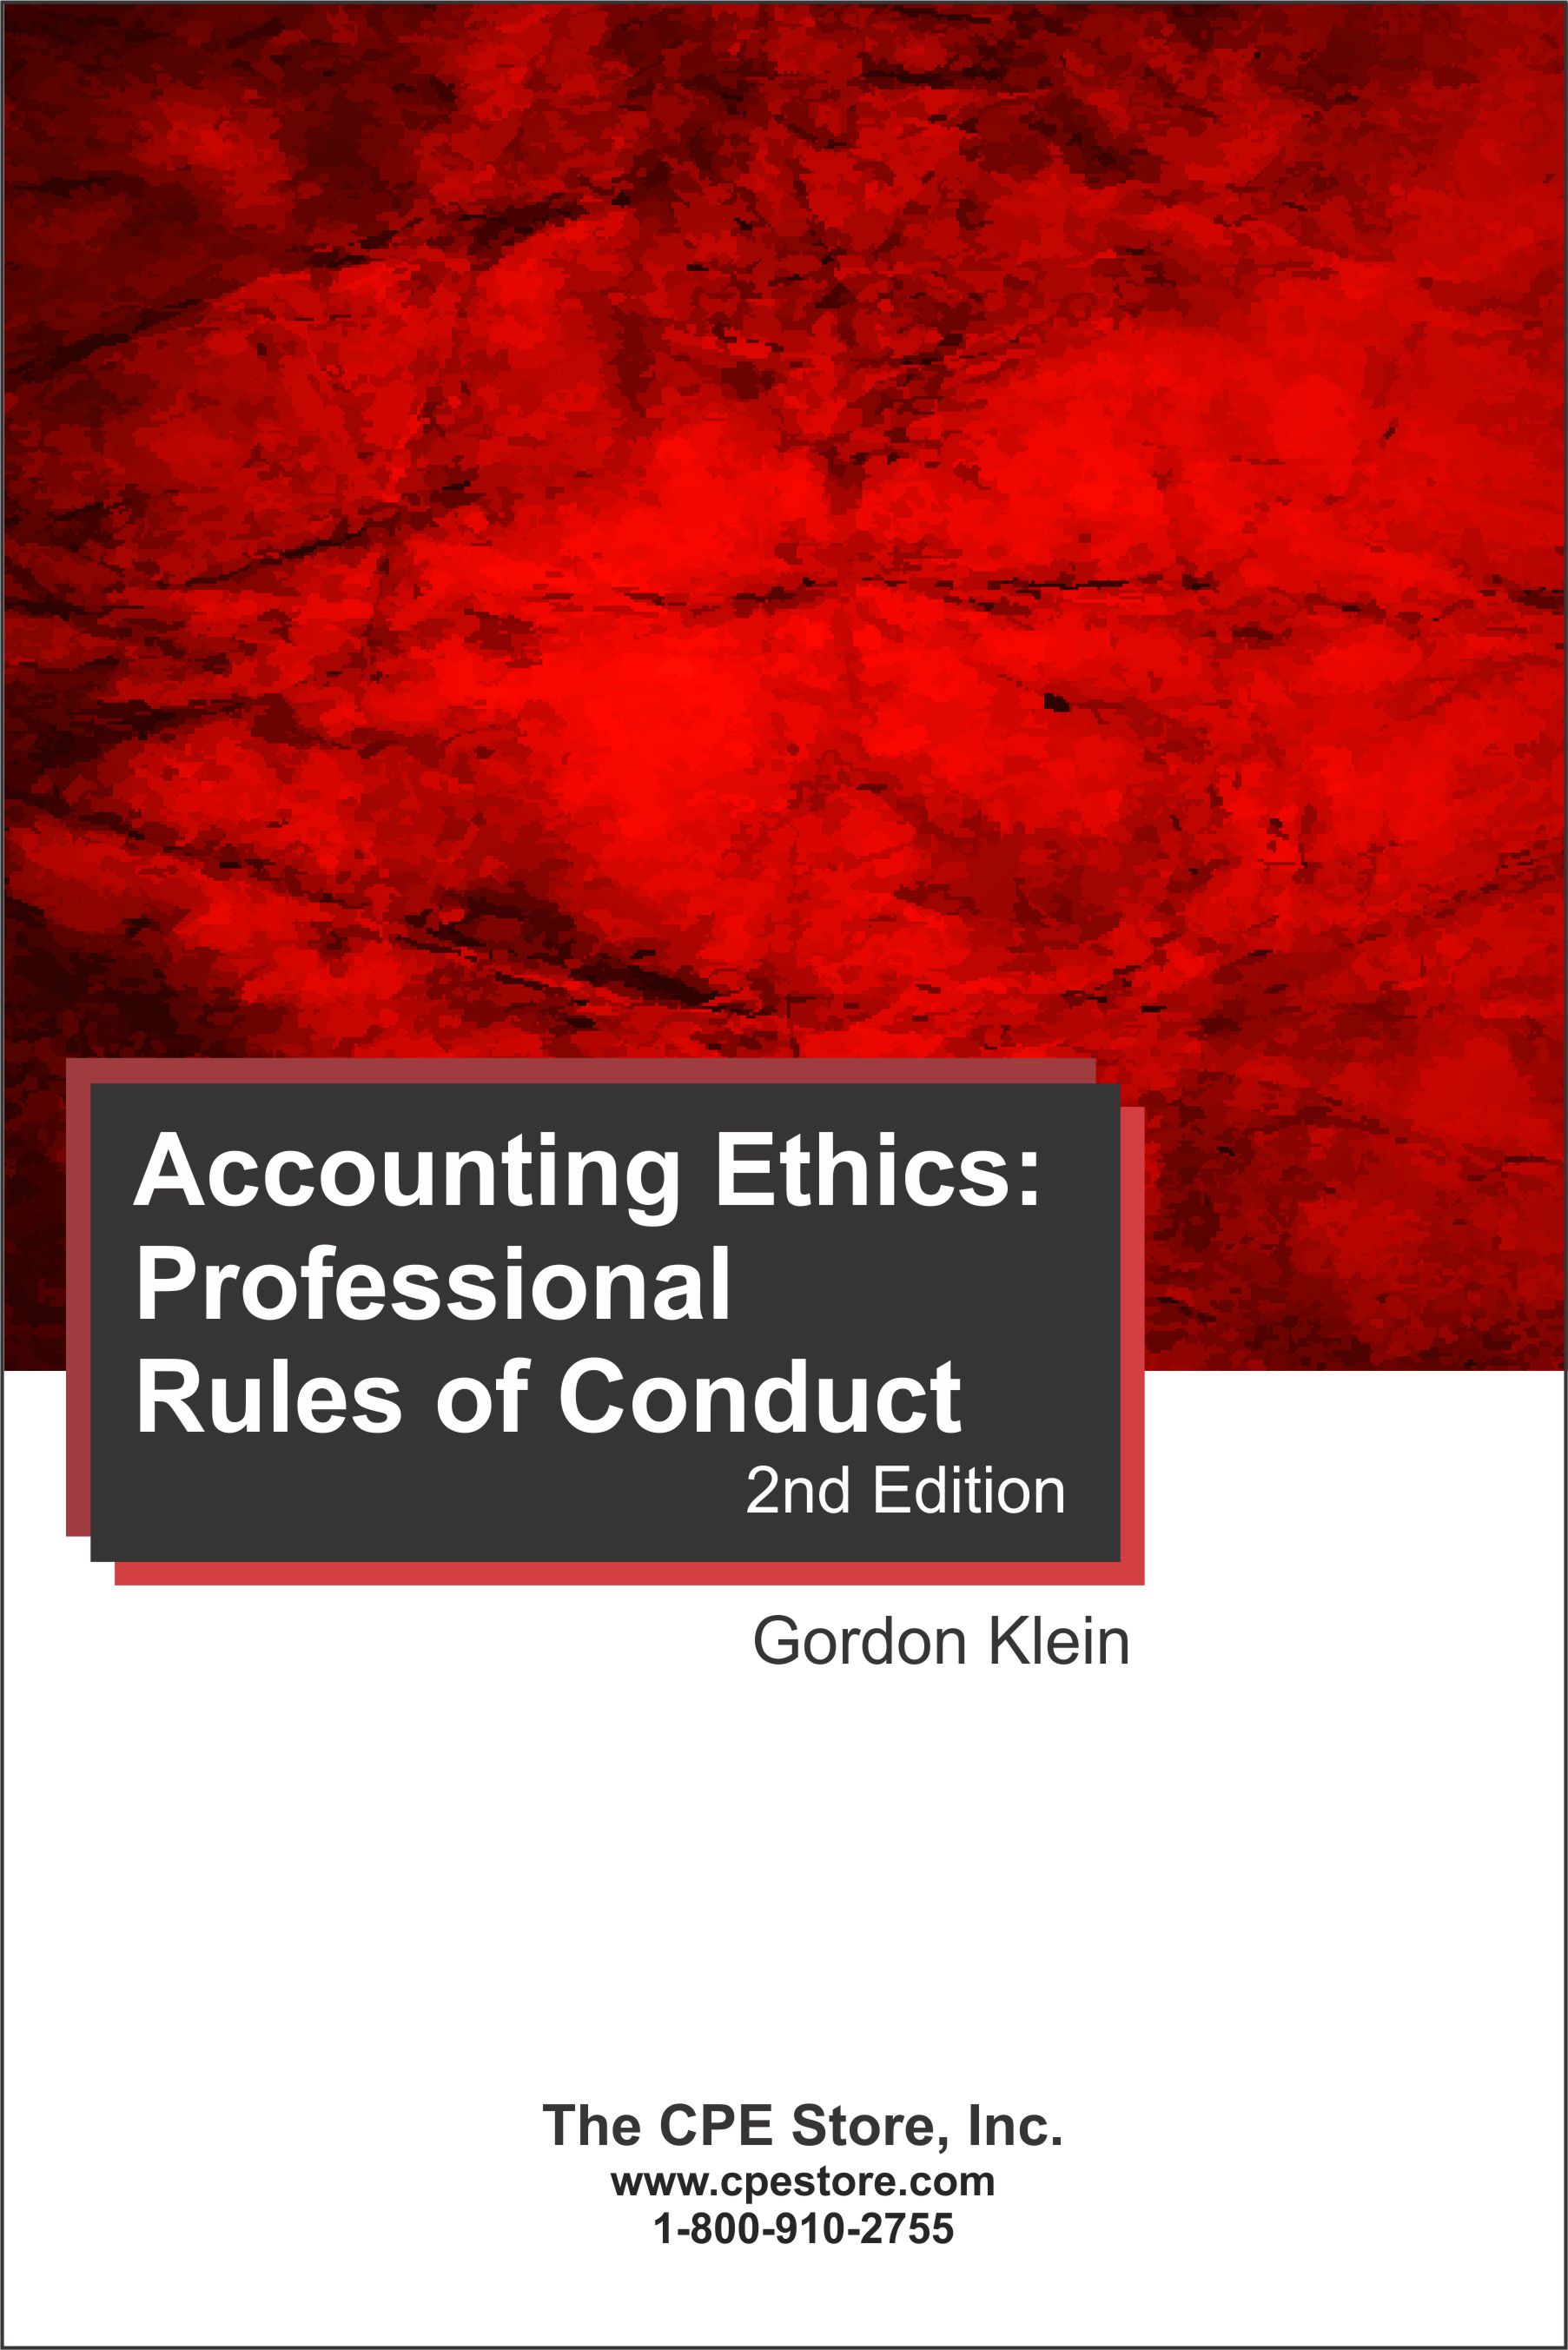 Accounting Ethics: Professional Rules of Conduct